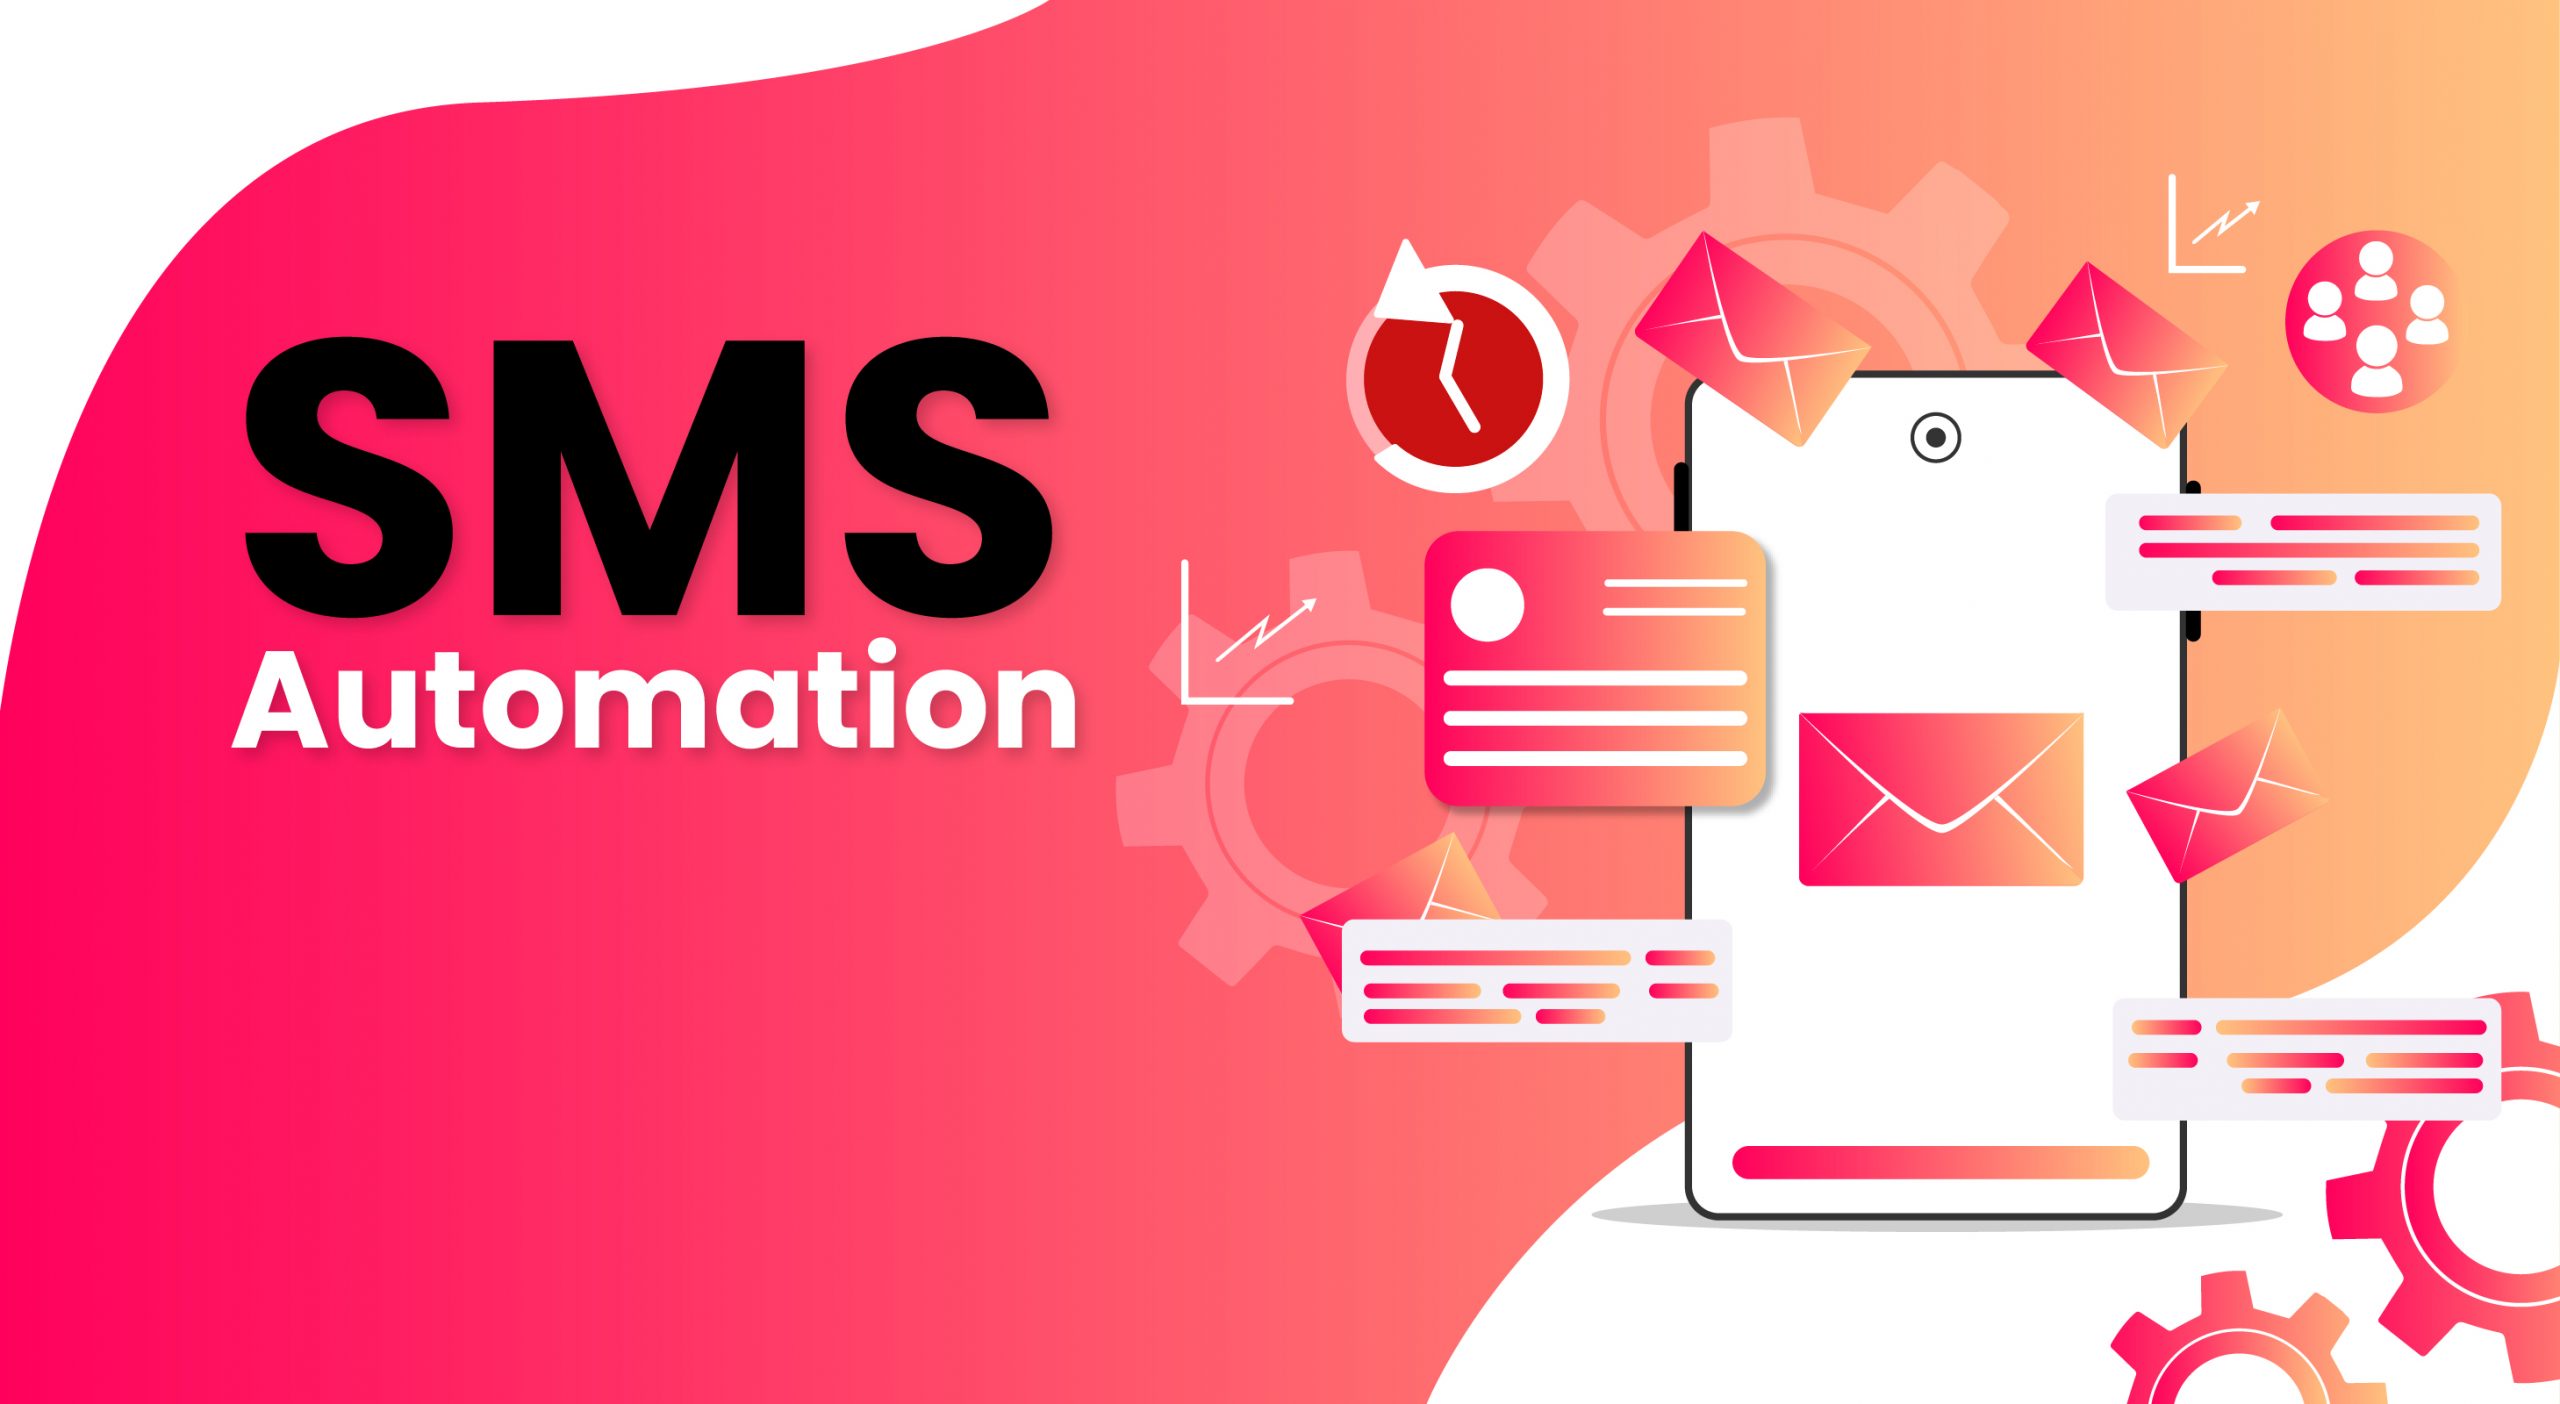 SMS Automation: Benefits, Features, Tools, and Pricing